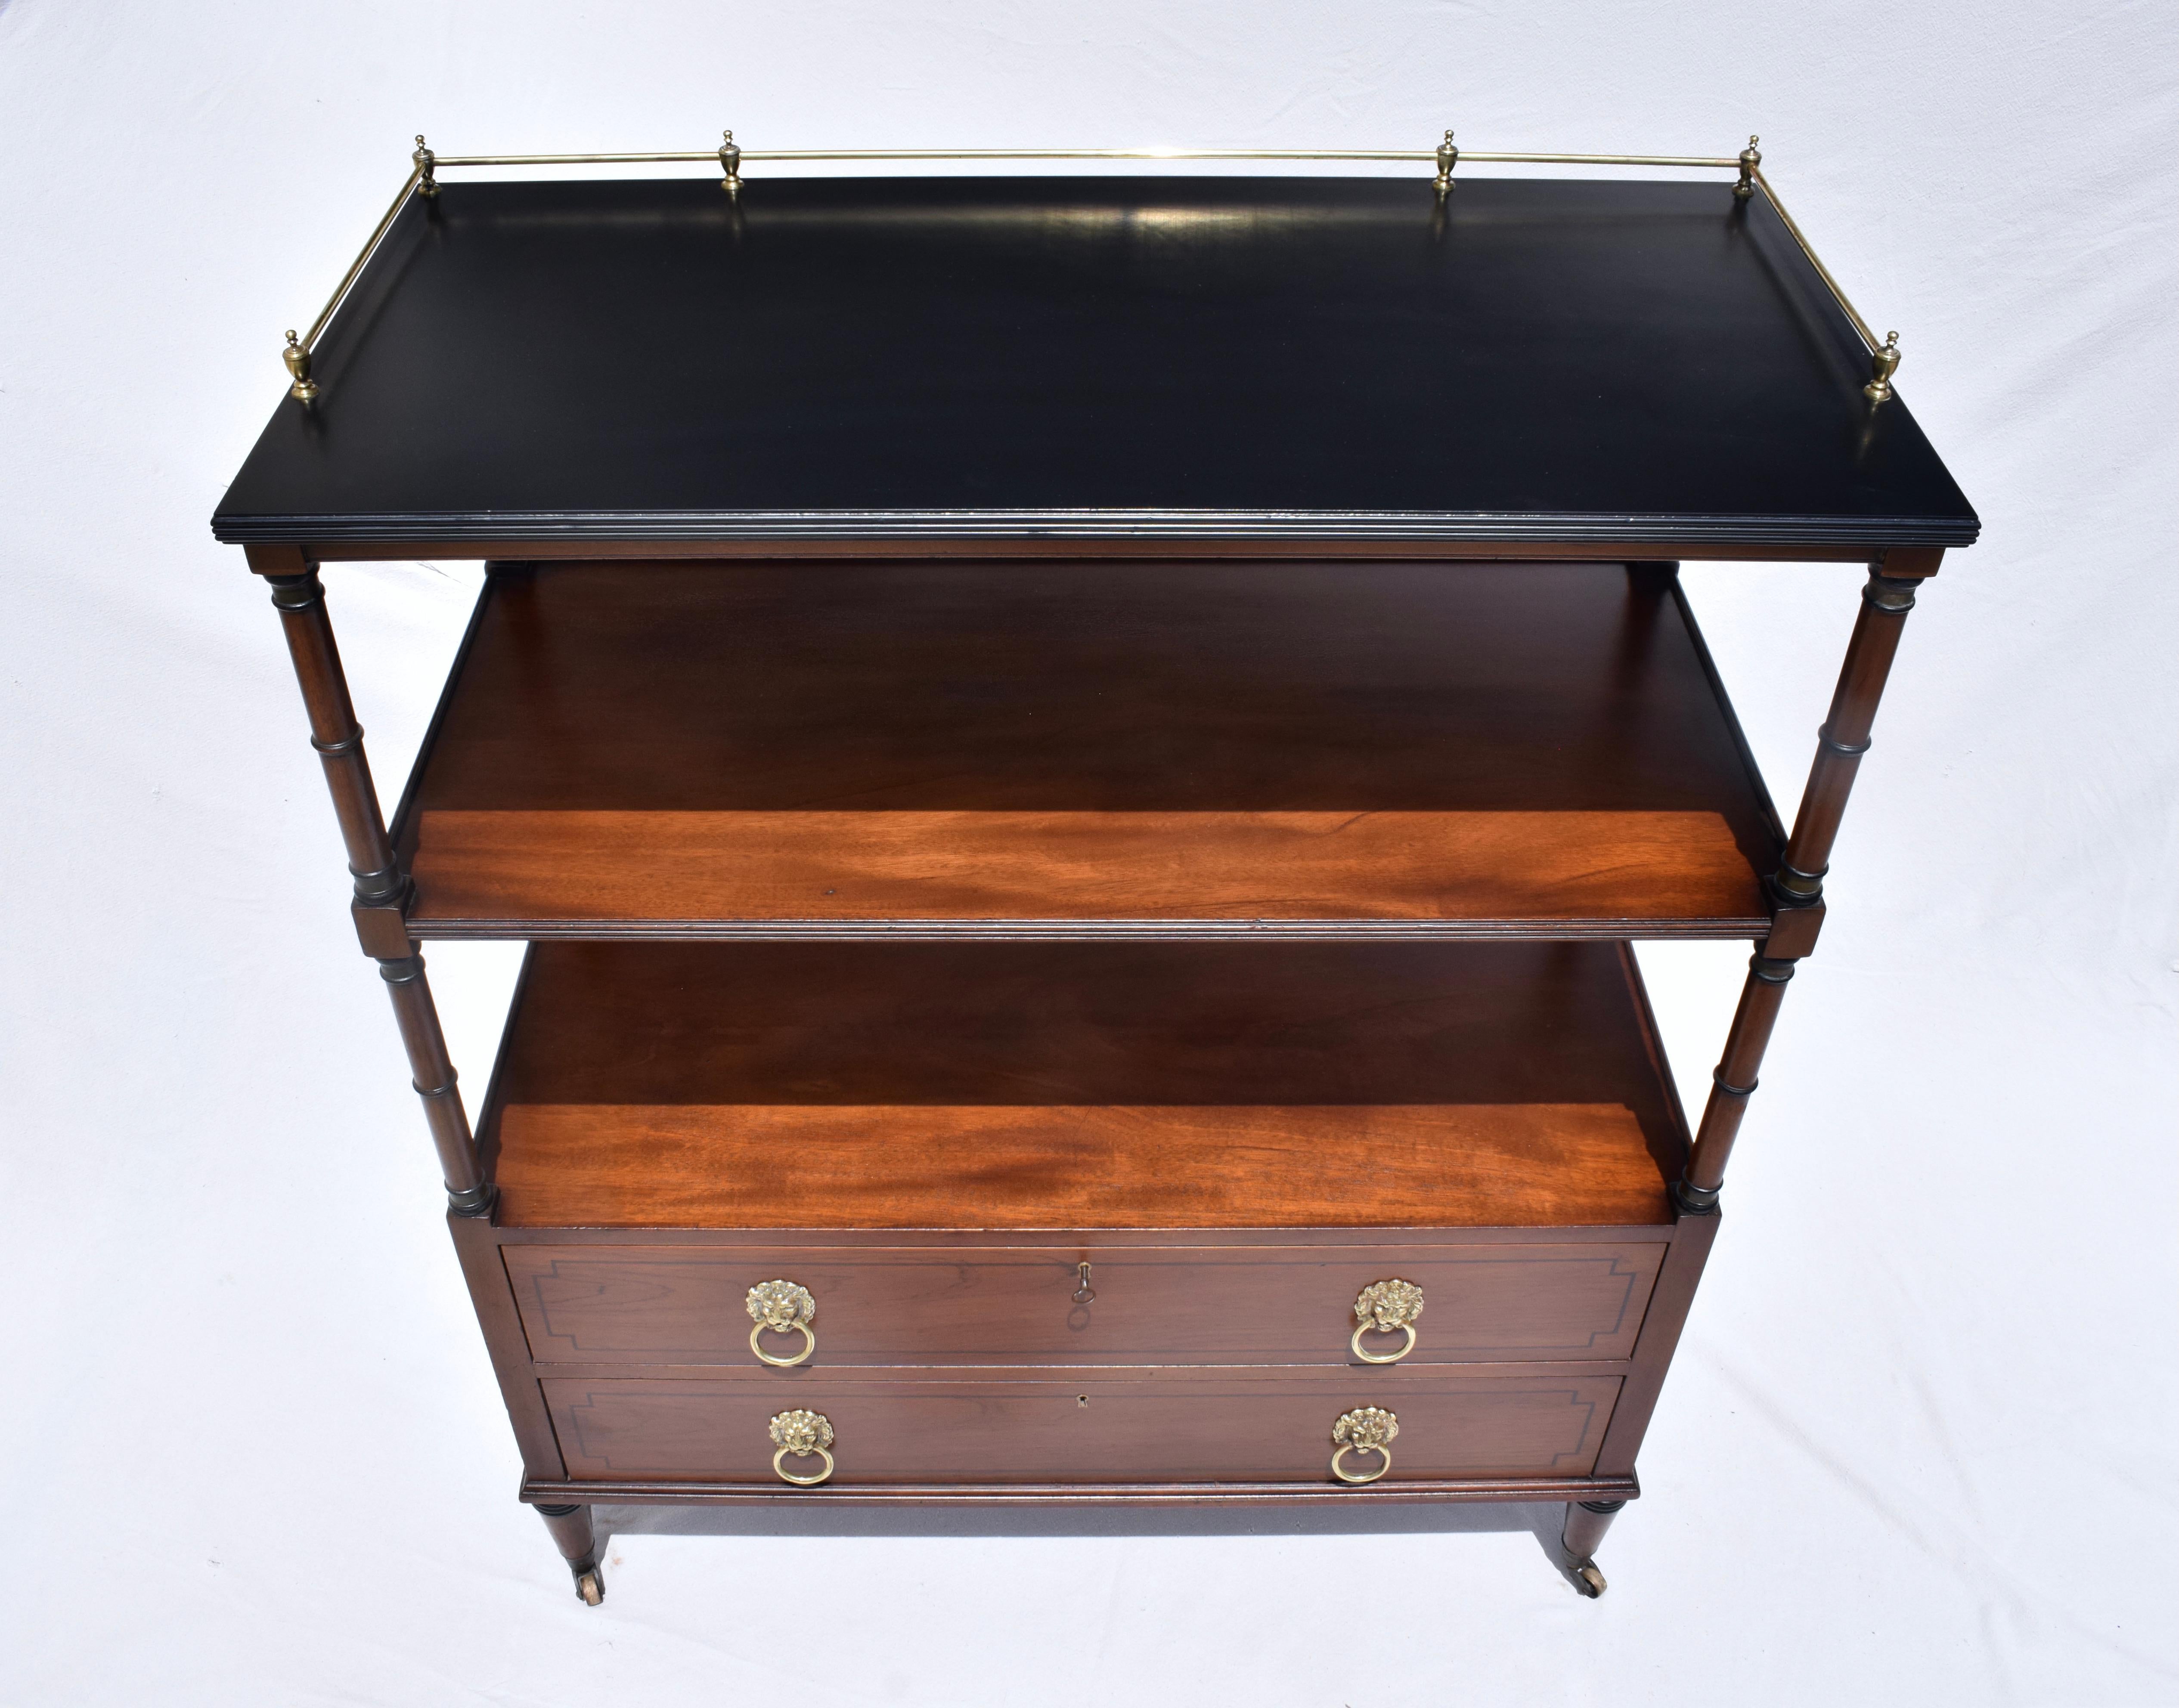 Versatile full body design English Regency style three tier two drawer server handmade in Buffalo, NY by the Kittinger Furniture Company. Set on brass castors with striking lion head brass hardware, this multifunctional piece is entirely moveable